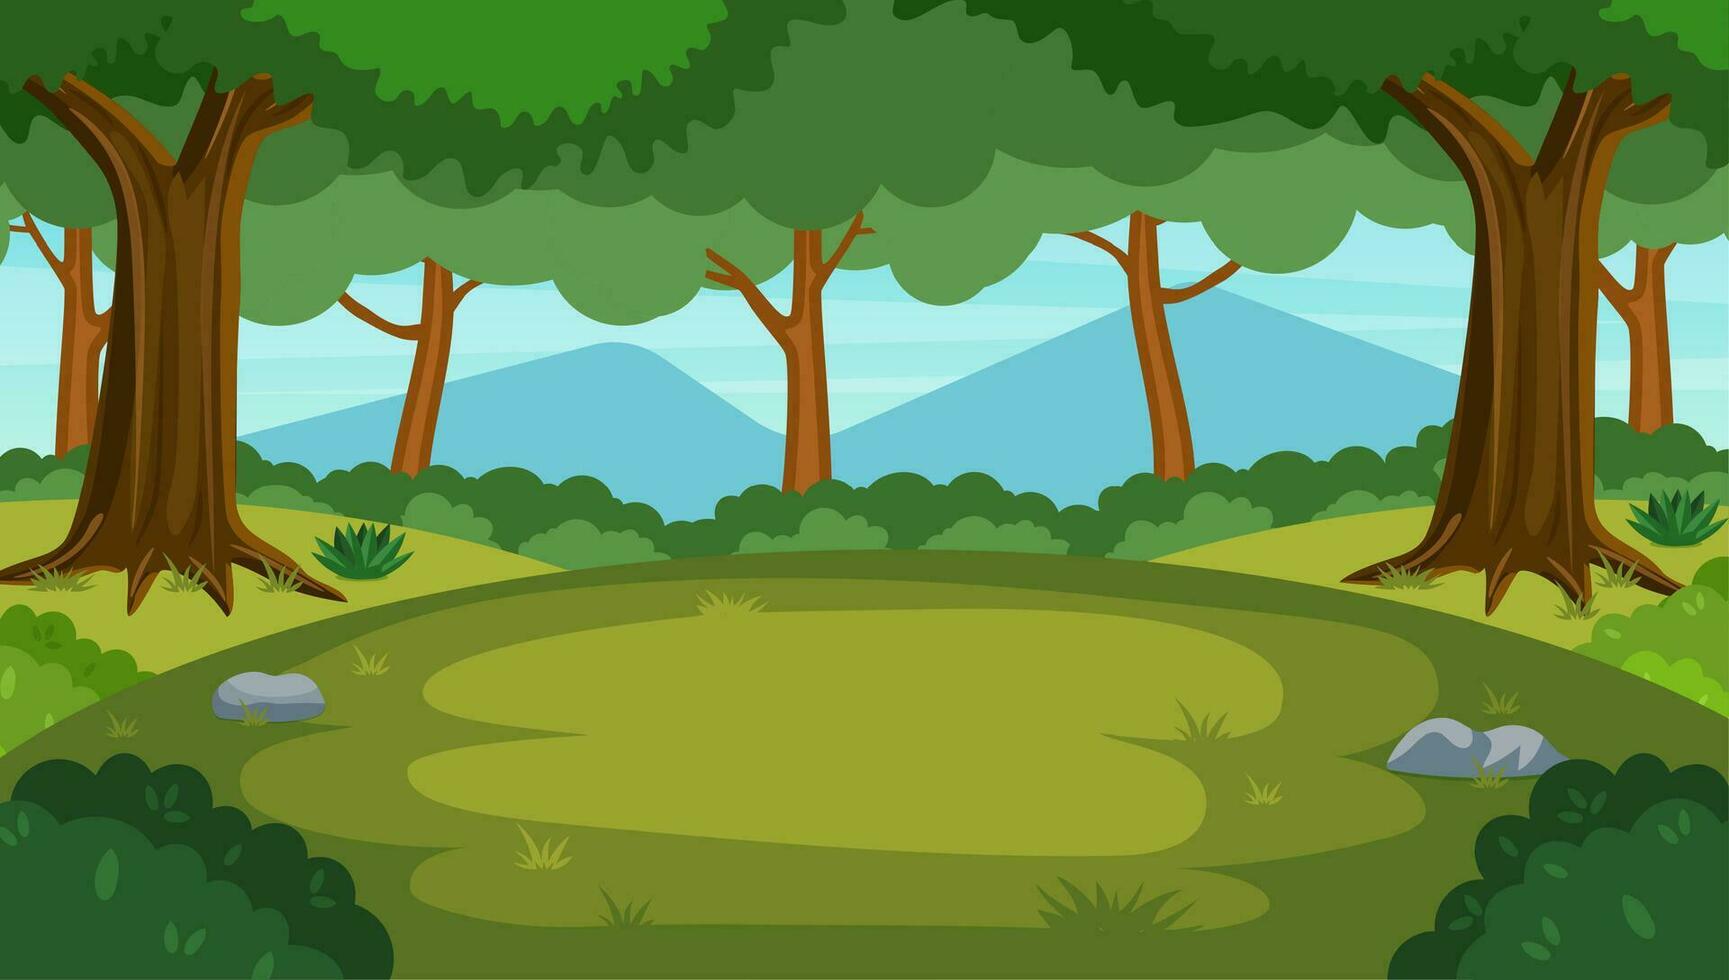 Cartoon forest background, nature landscape with deciduous trees, green grass, bushes. Scenery view, summer or spring wood. Vector illustration in flat style